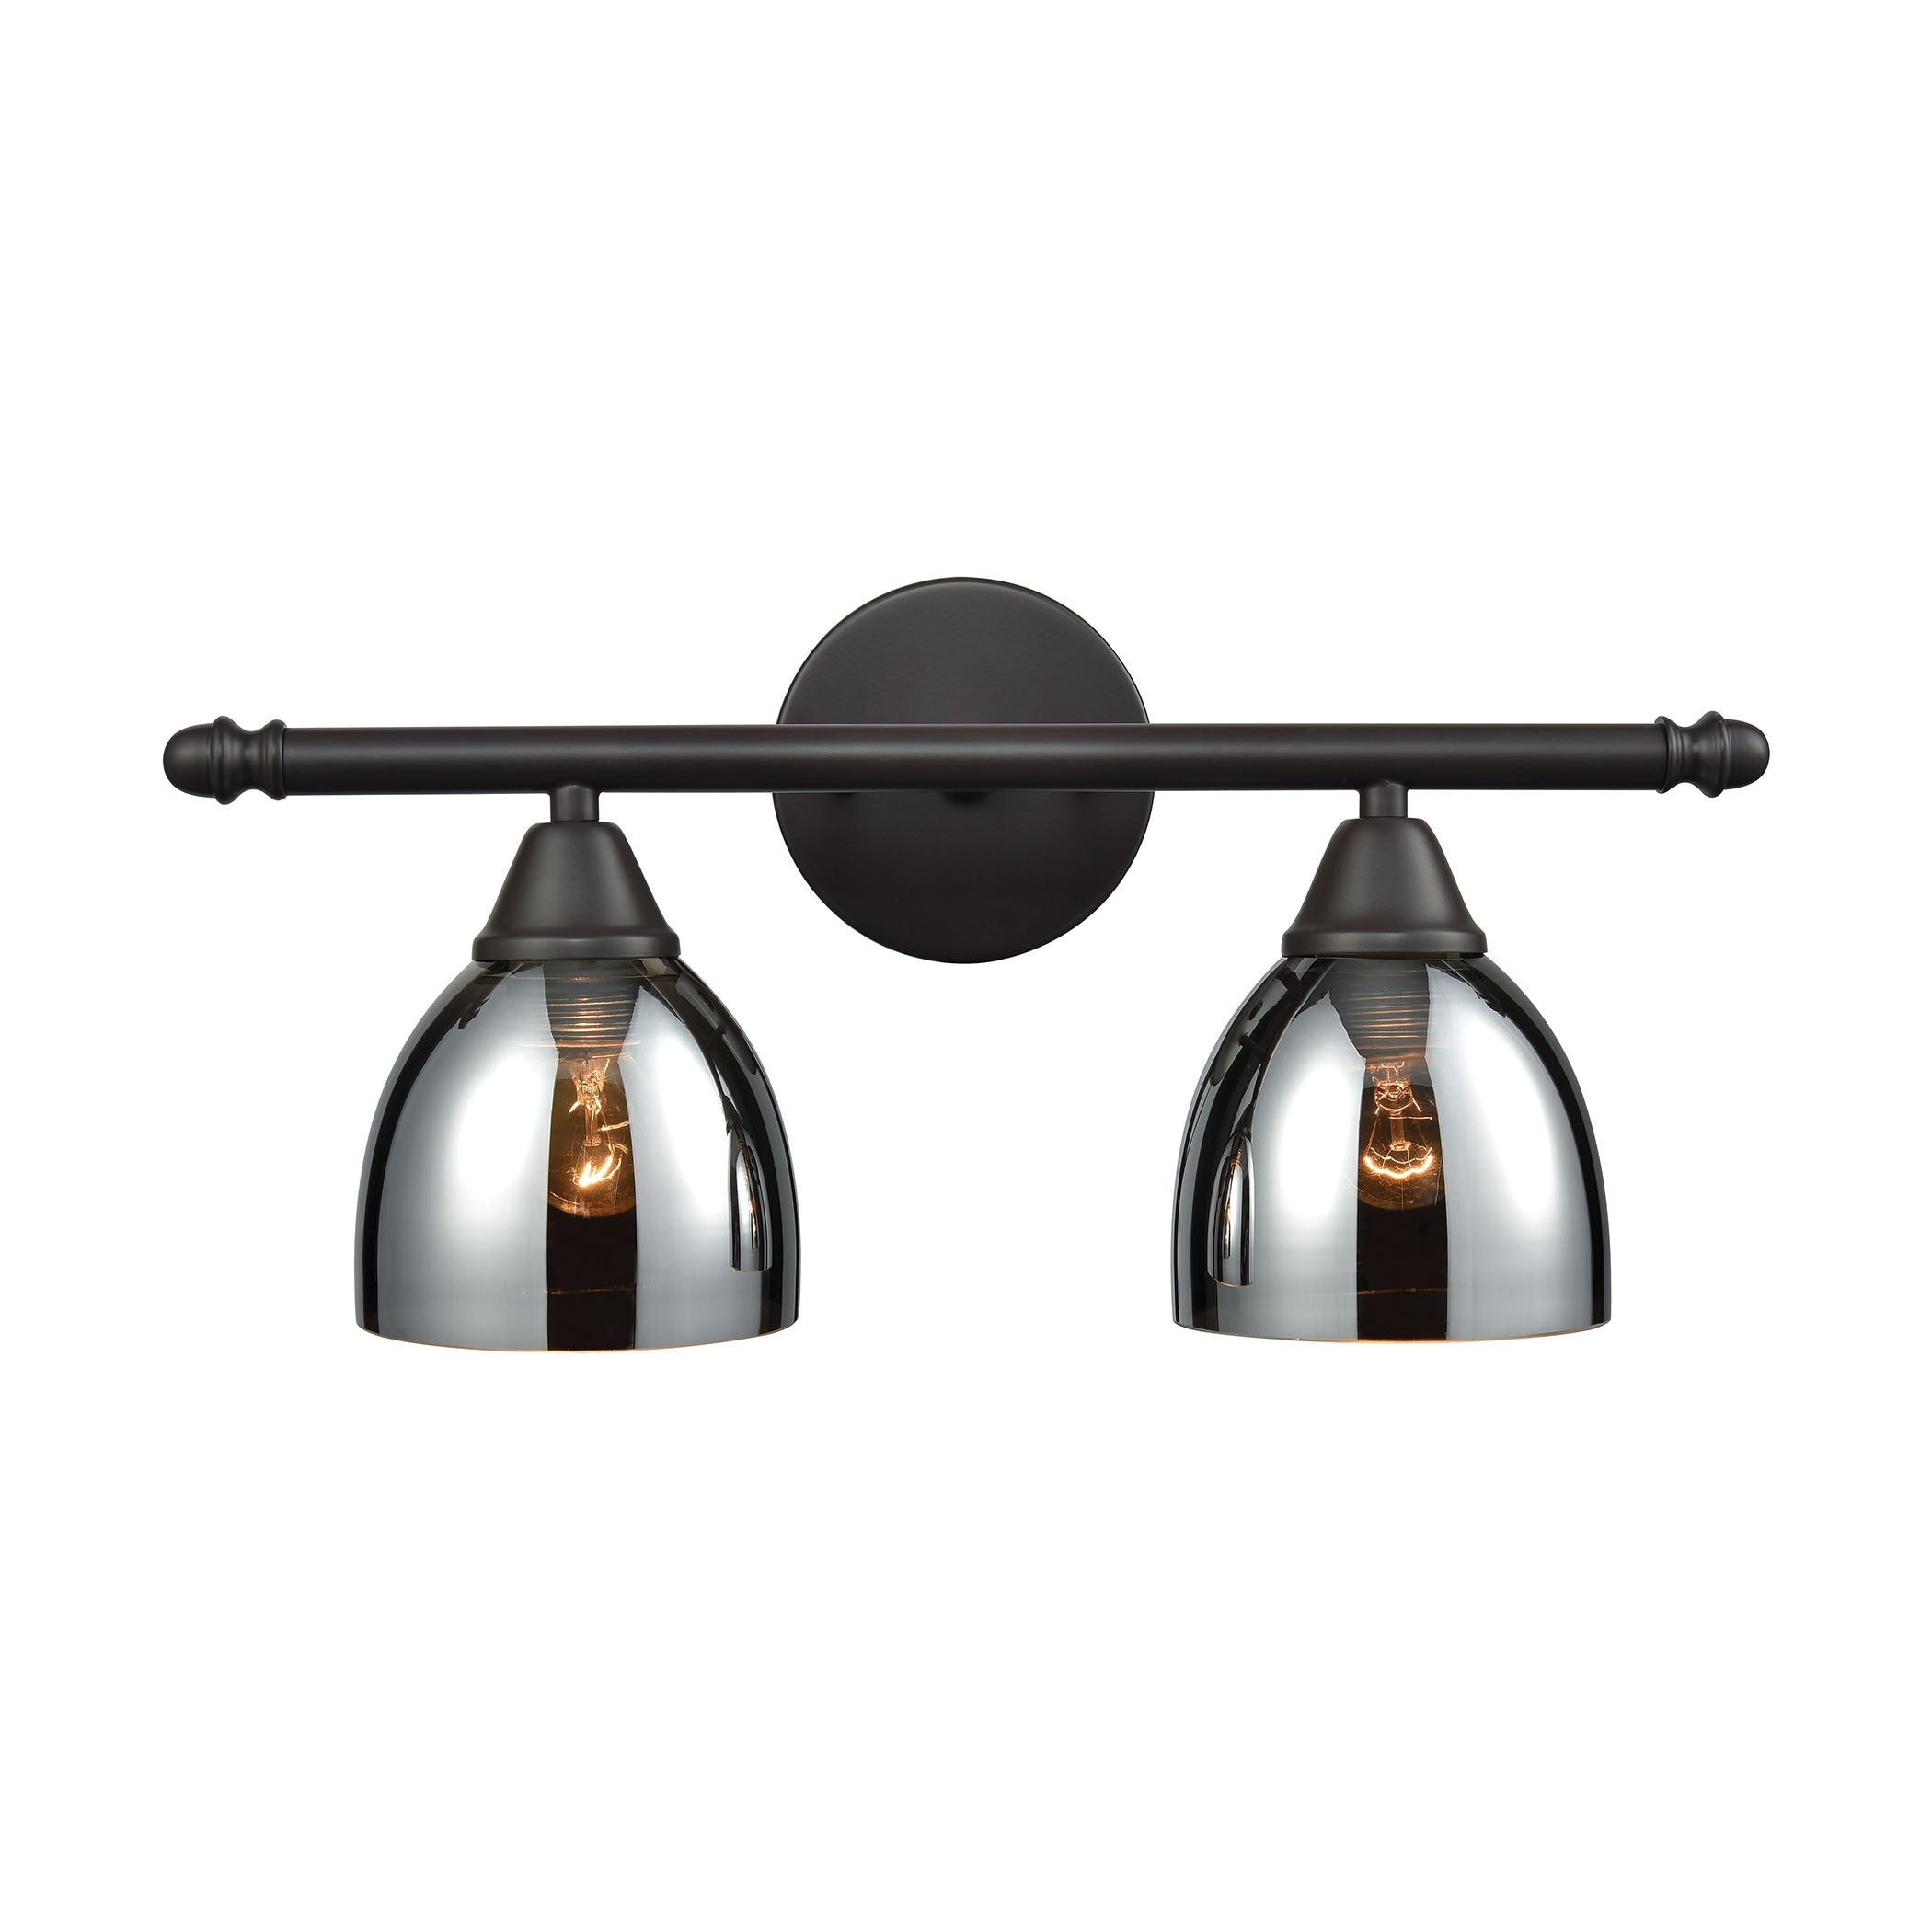 ELK Lighting 10271/2 Reflections 2-Light Vanity Lamp in Oil Rubbed Bronze with Chrome-plated Glass